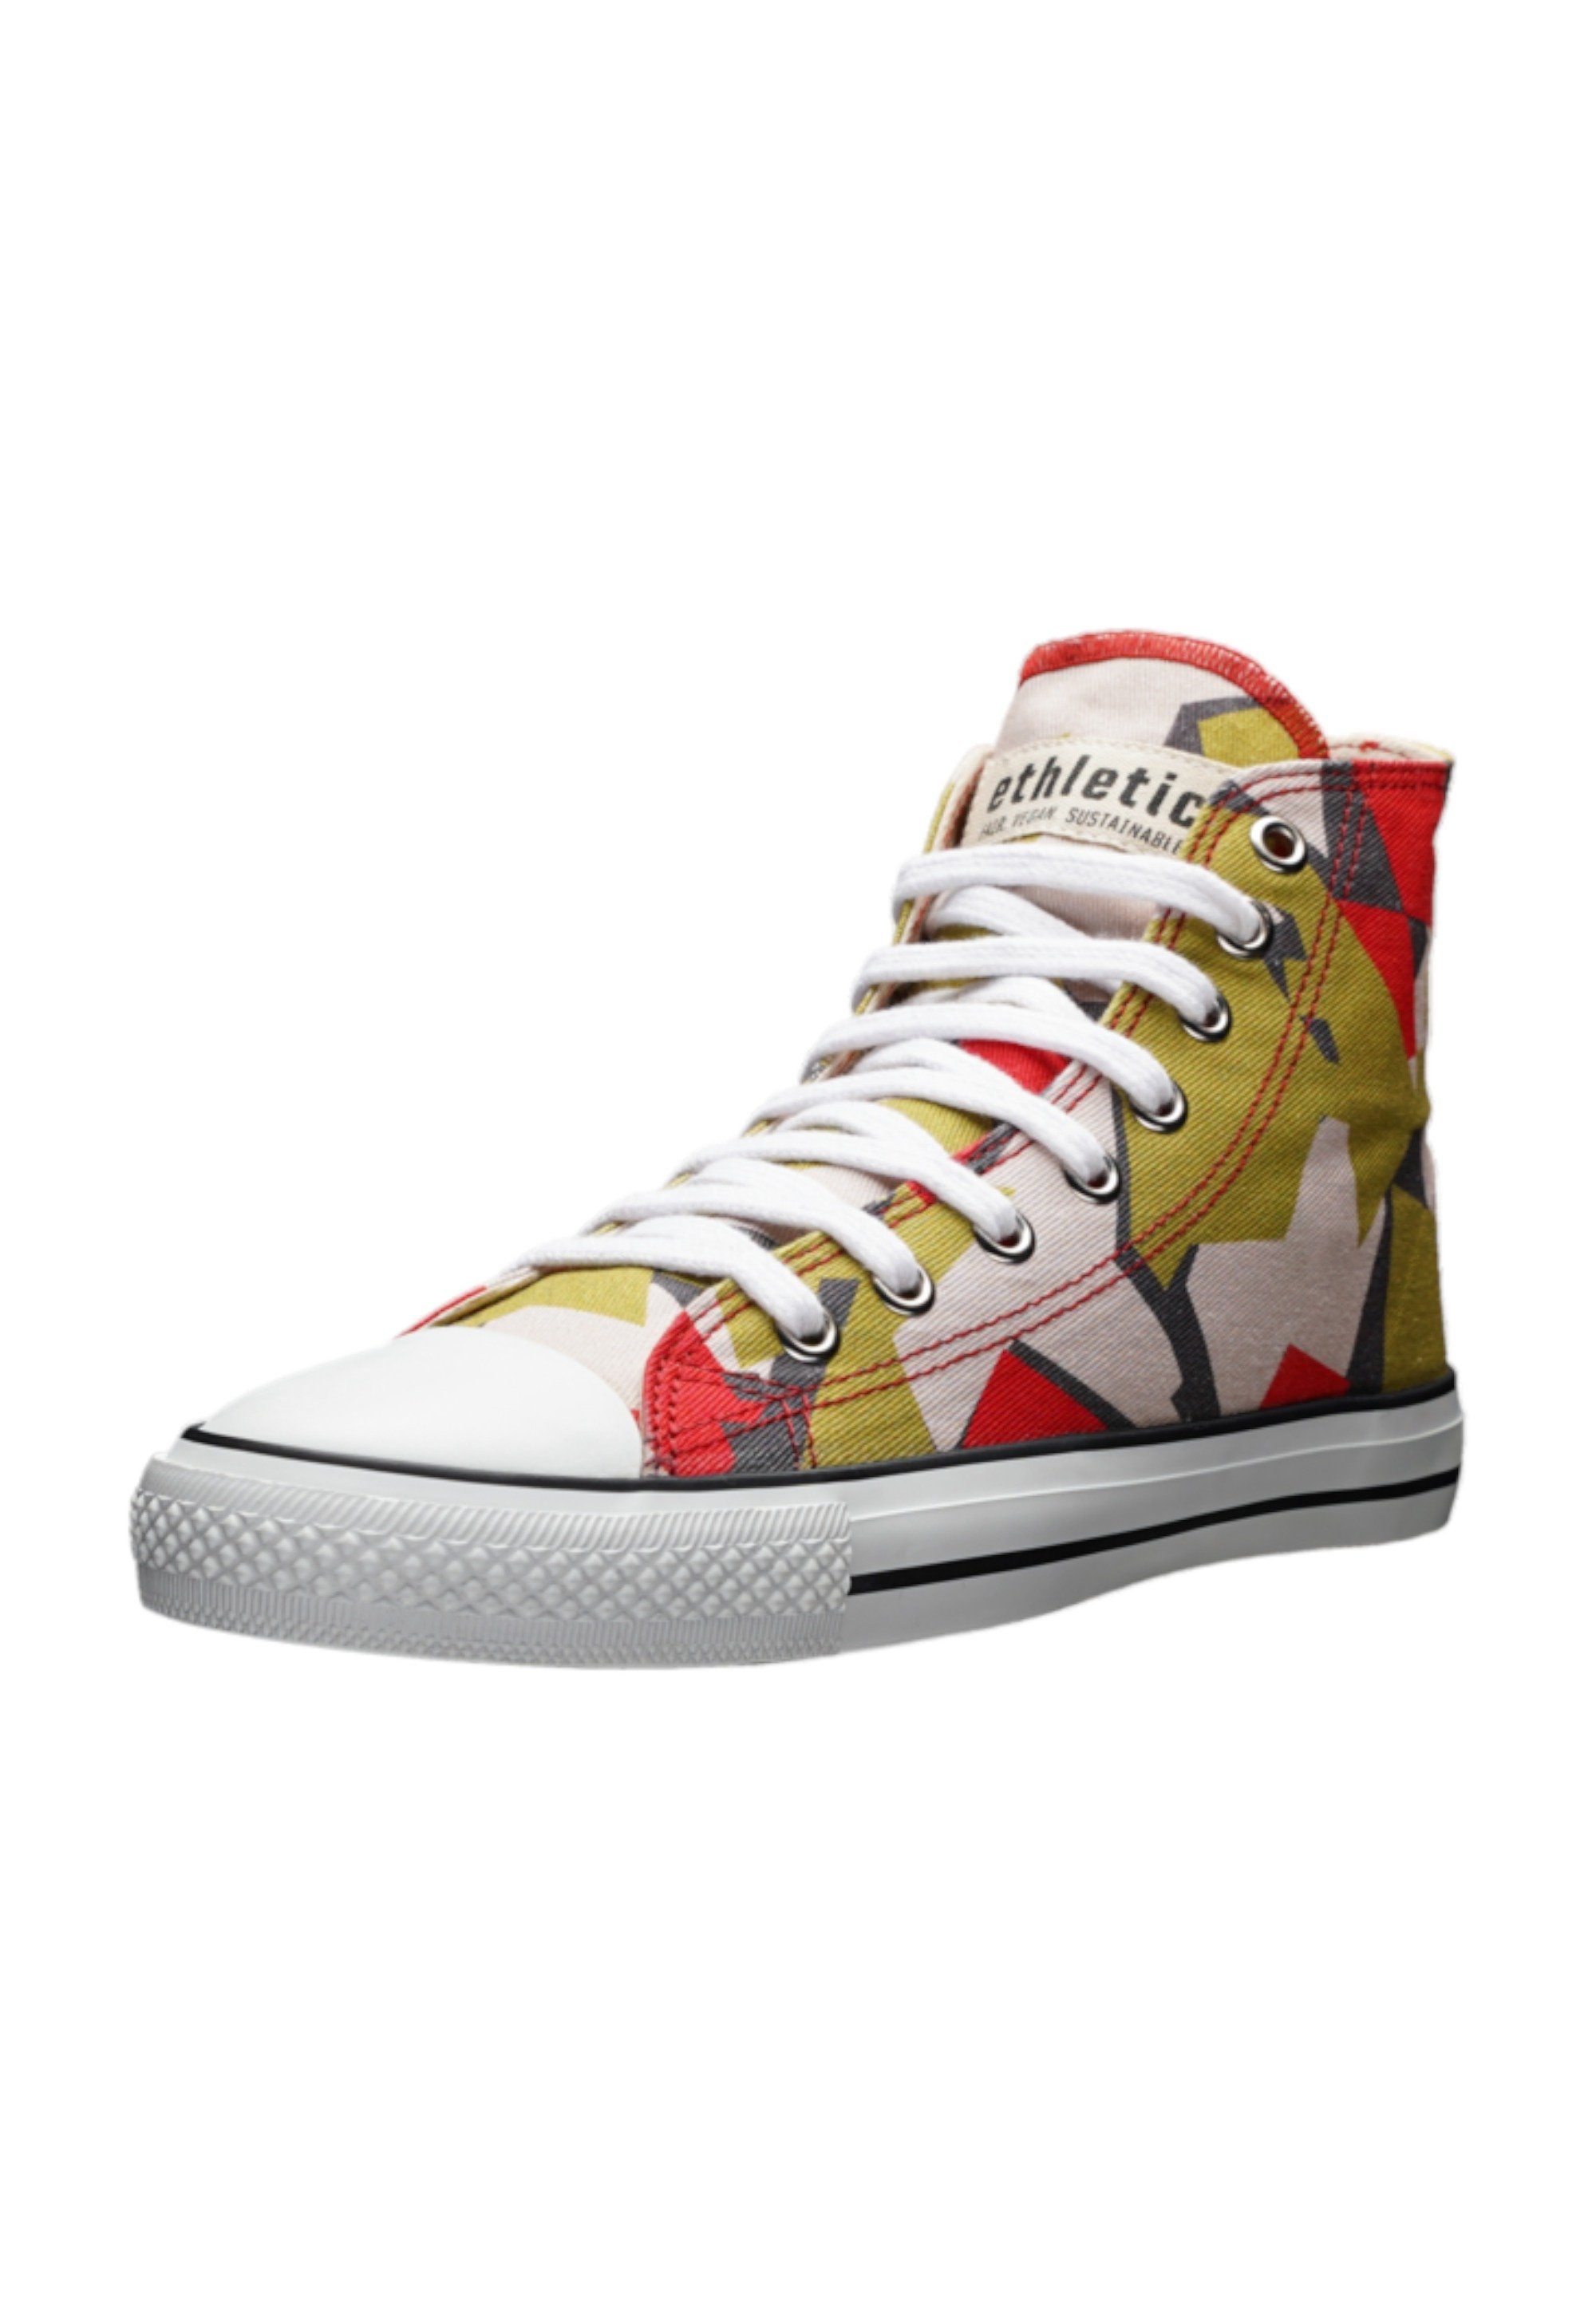 White Hi White ETHLETIC Produkt Sneaker Just Red Cap Cut Fairtrade Camou -